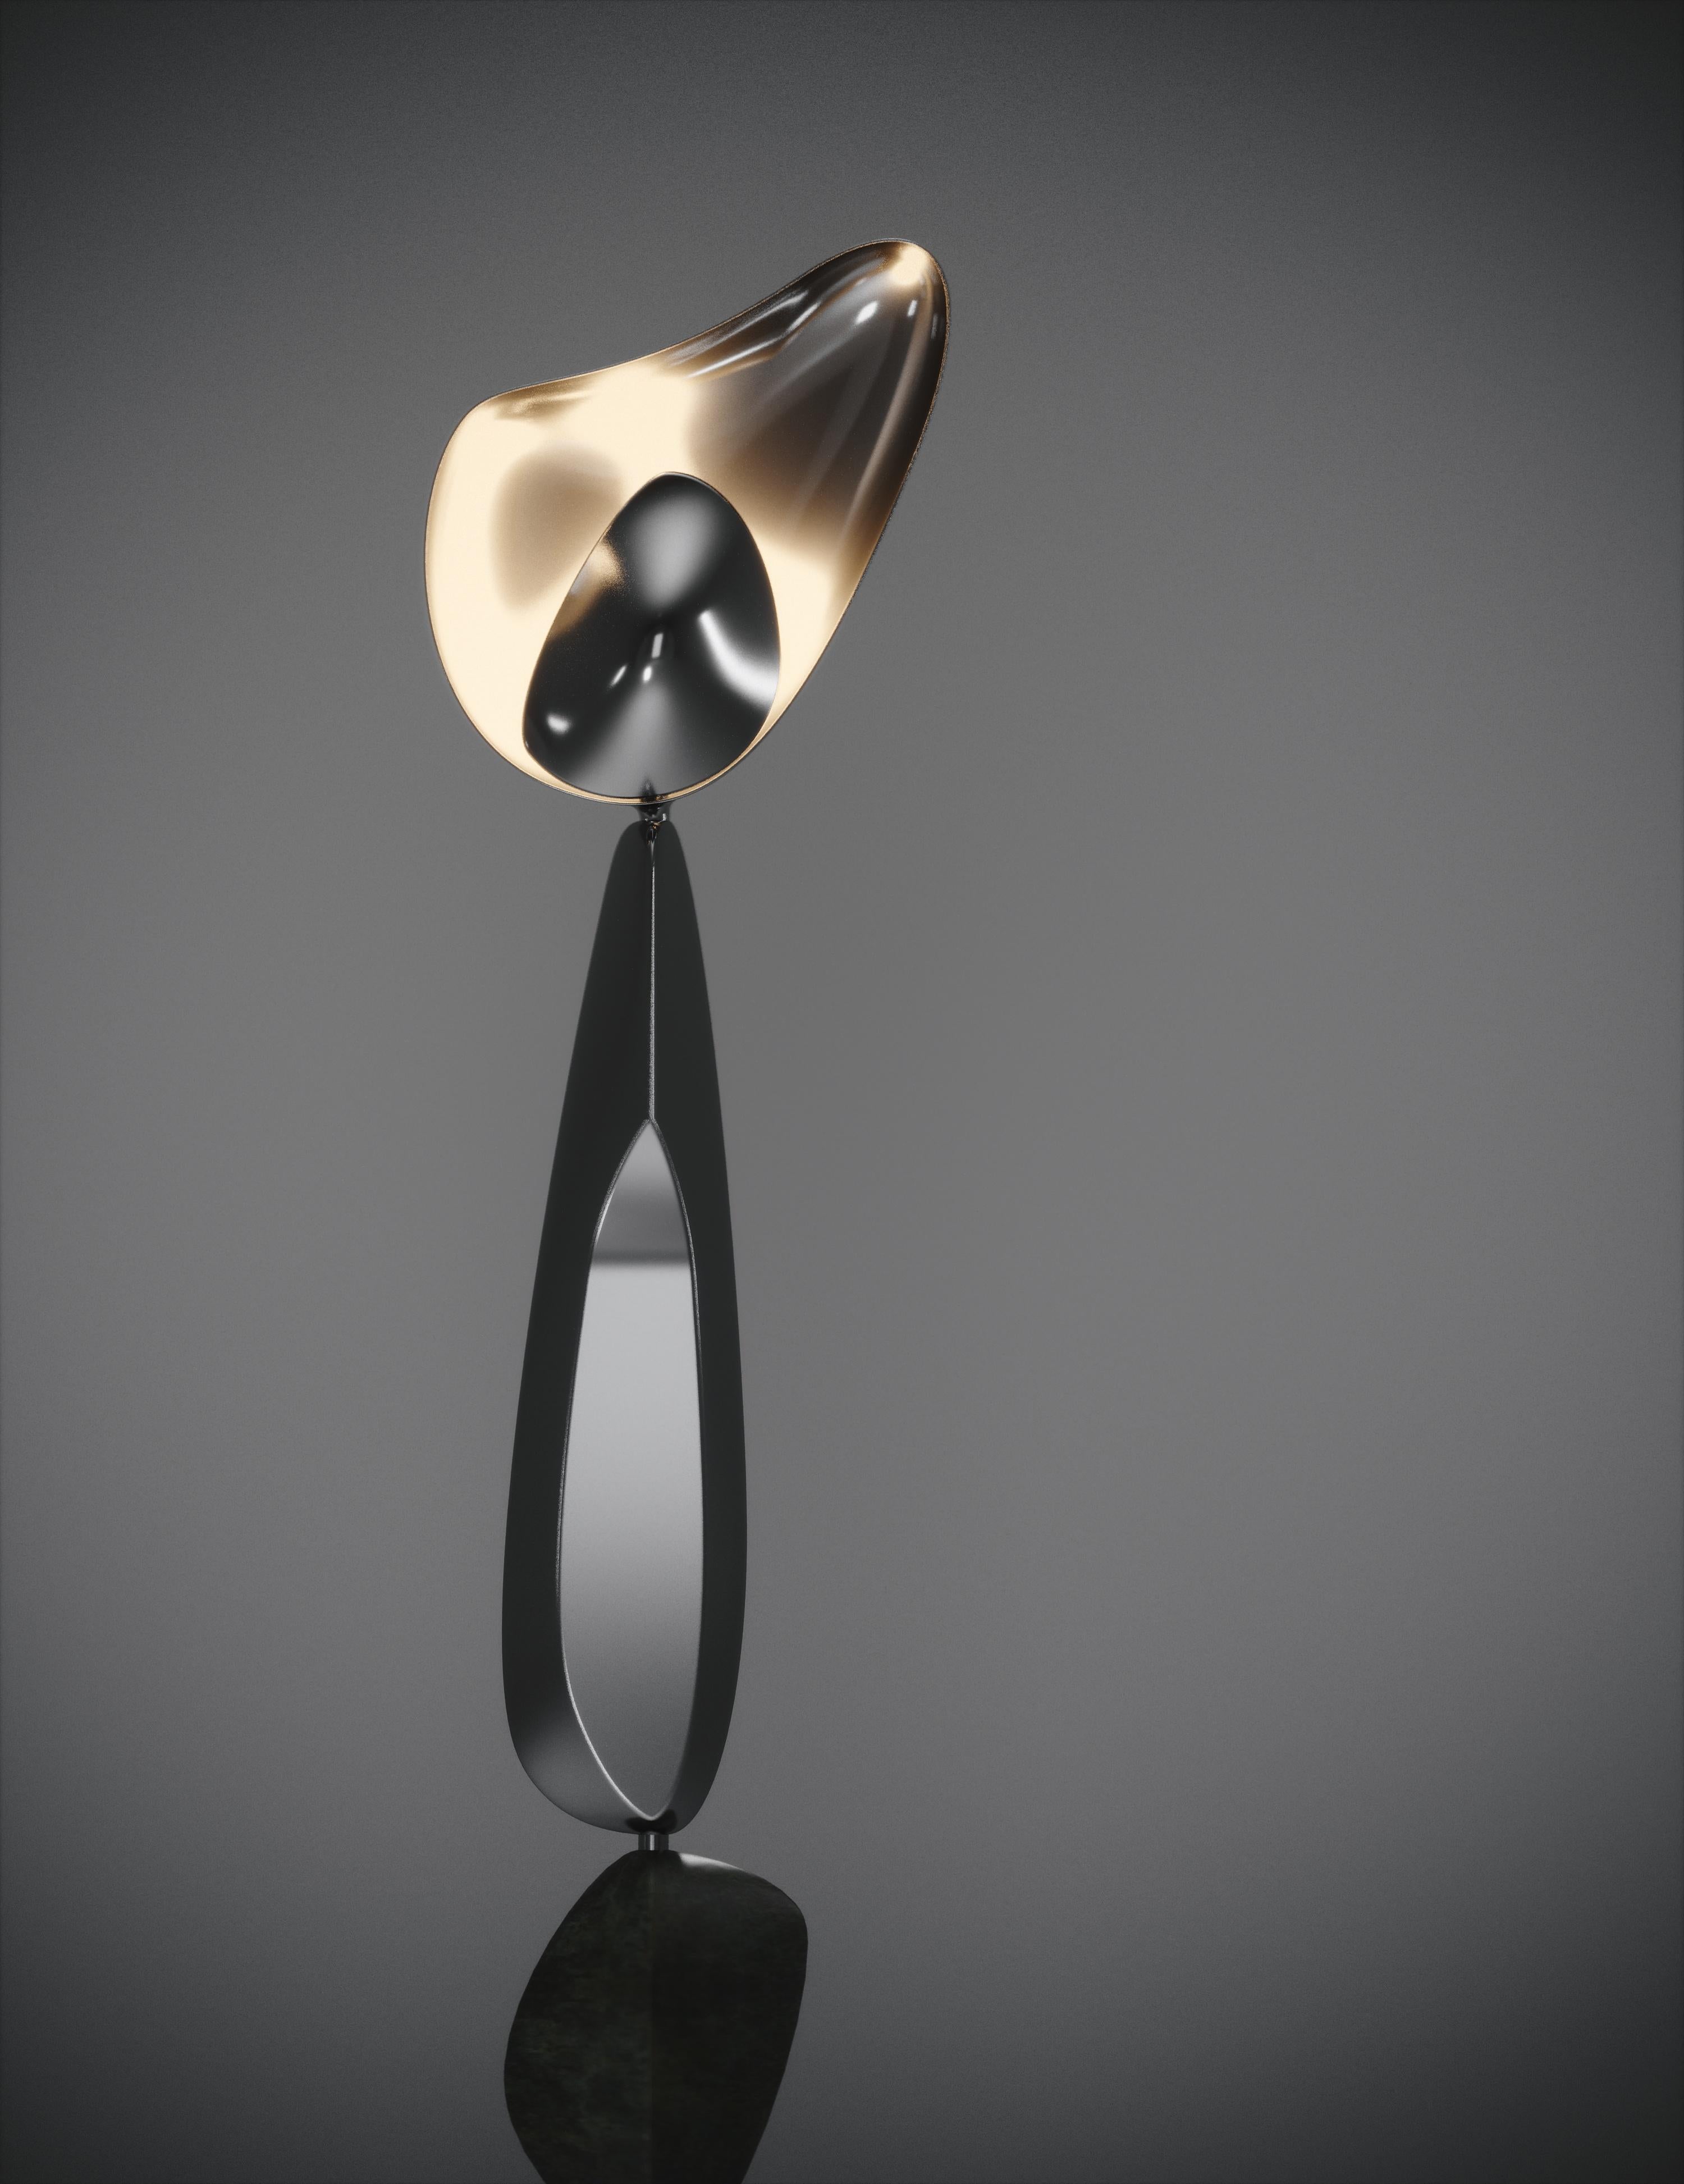 The Cosmo Moon floor lamp by Kifu Paris is a whimsical and sculptural piece, inlaid in a chrome finish polished stainless steel with parchment inlay; creating a vintage feel to the piece. The amorphous shapes are an abstract and poetic